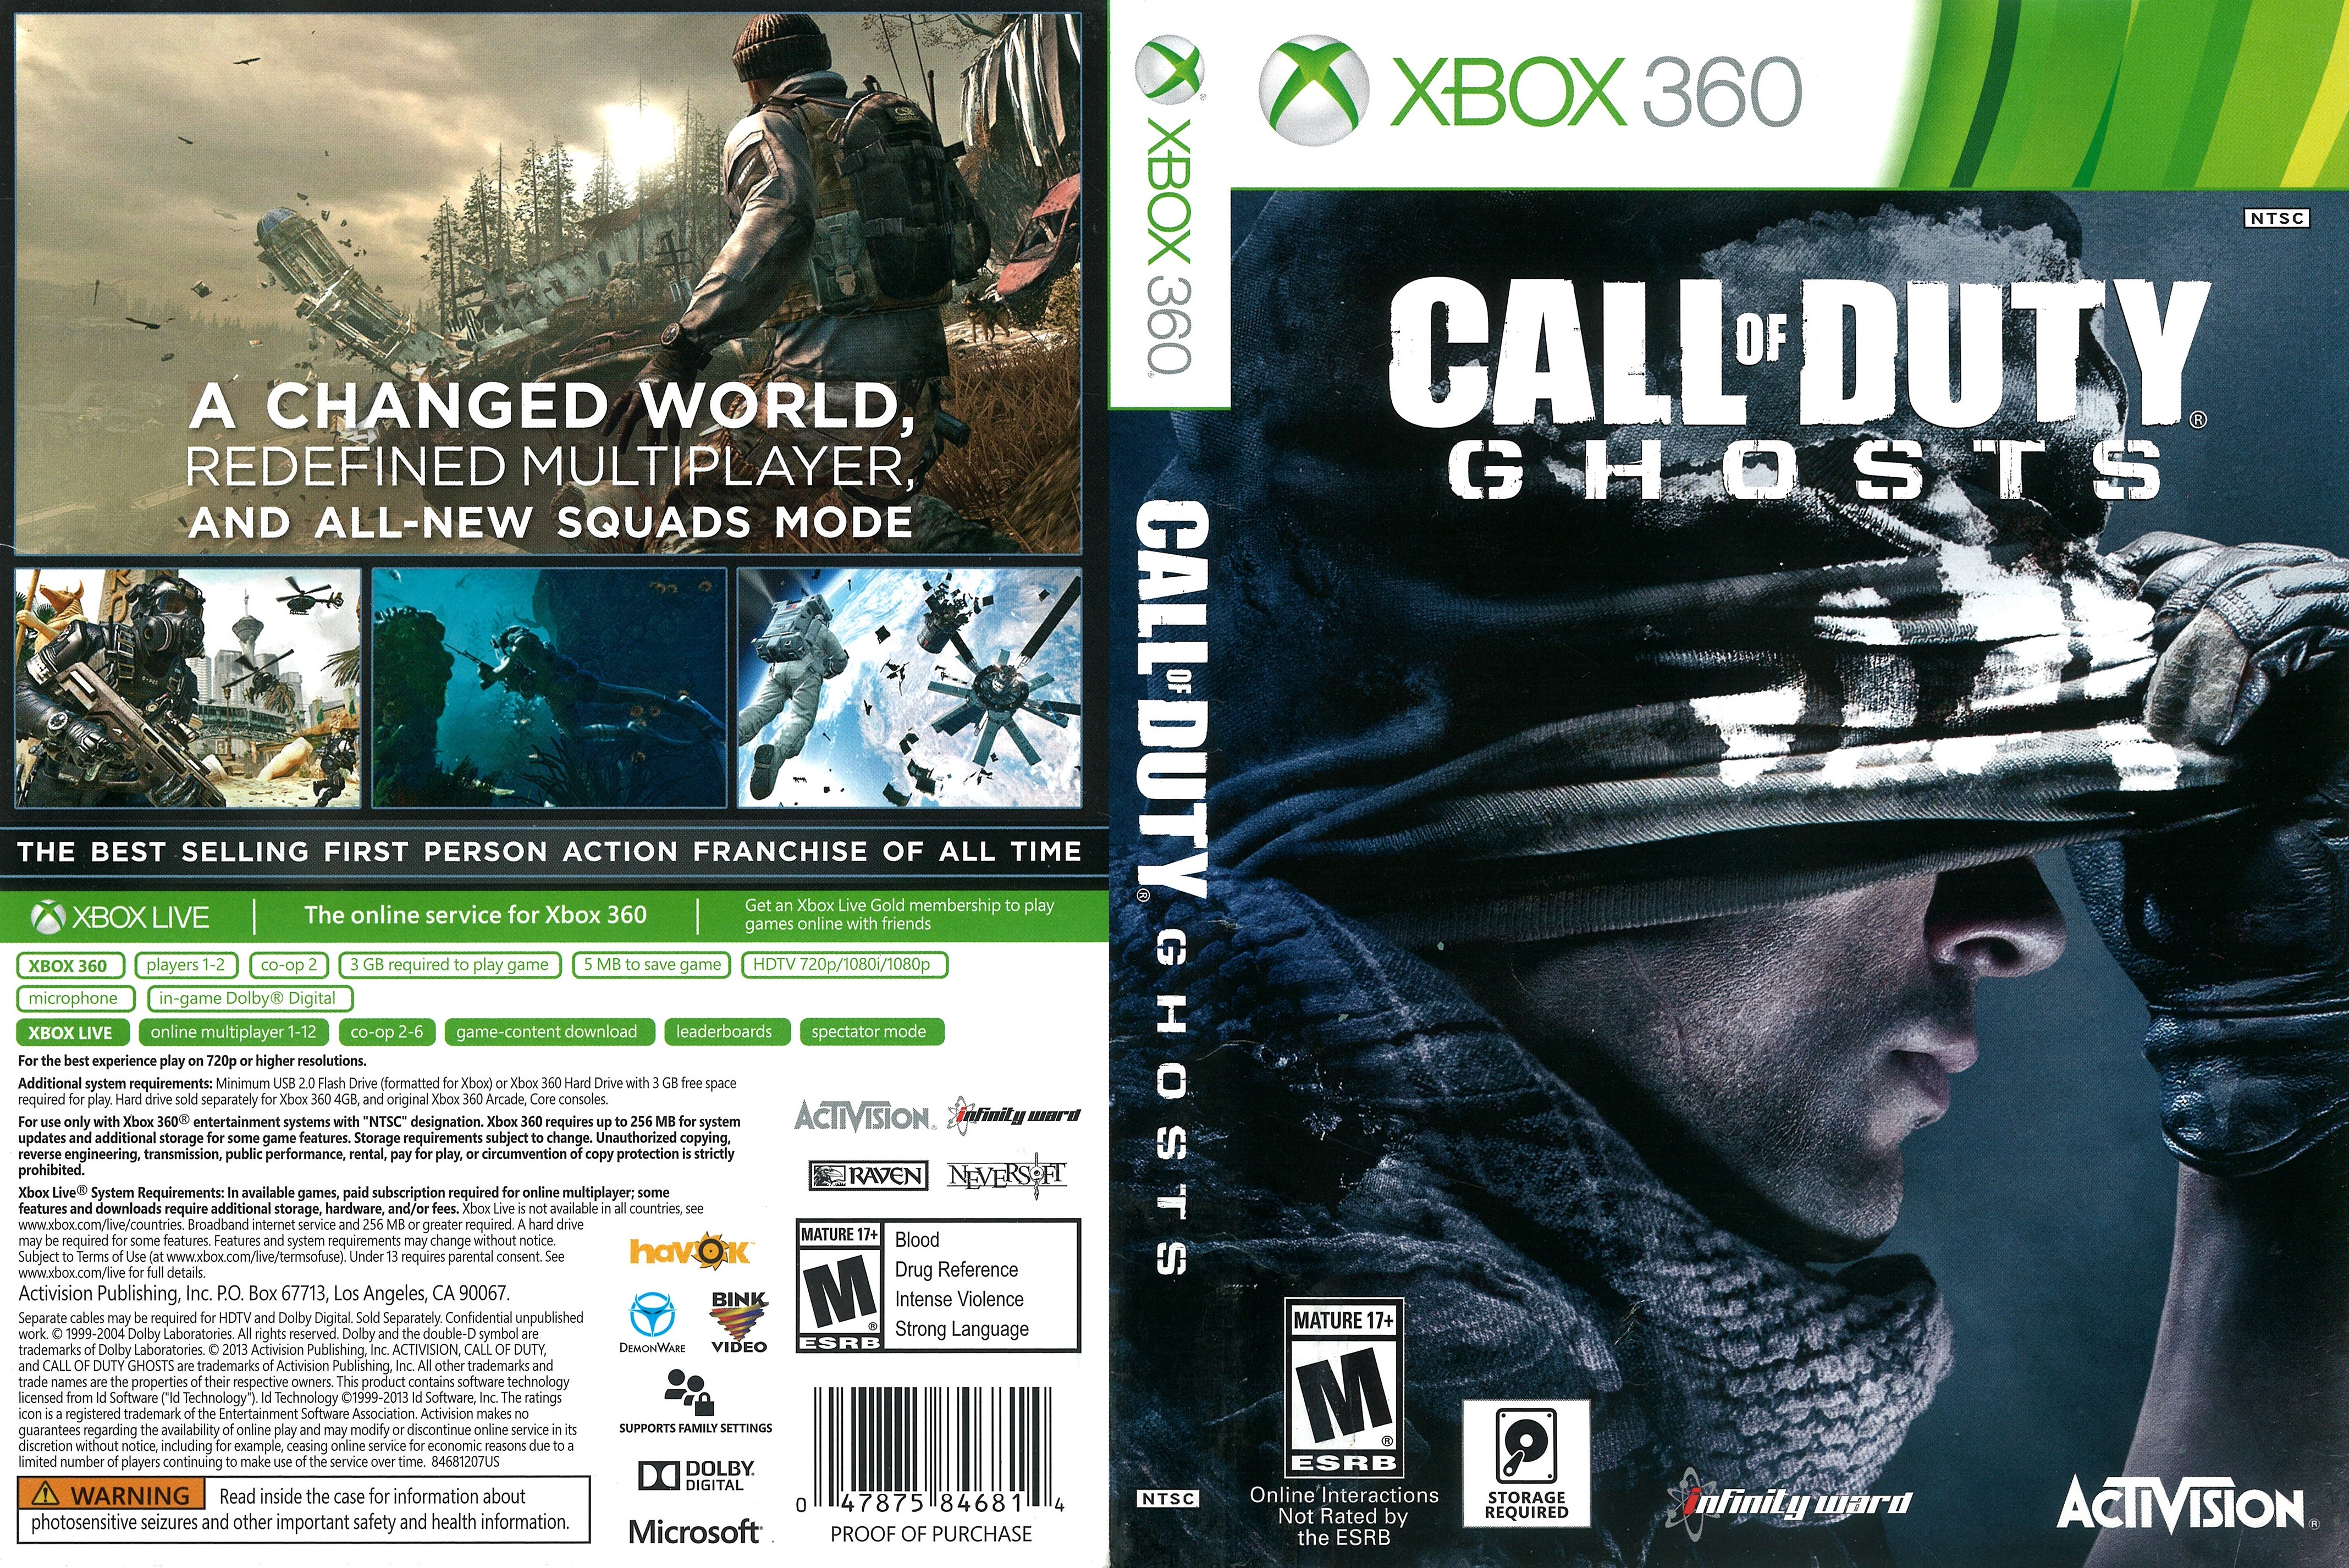 Xbox games download. Call of Duty Ghosts Xbox 360 обложка. Call of Duty 3 Xbox 360 диск. Call of Duty диск на иксбокс 360. Call of Duty диск на Xbox 360.